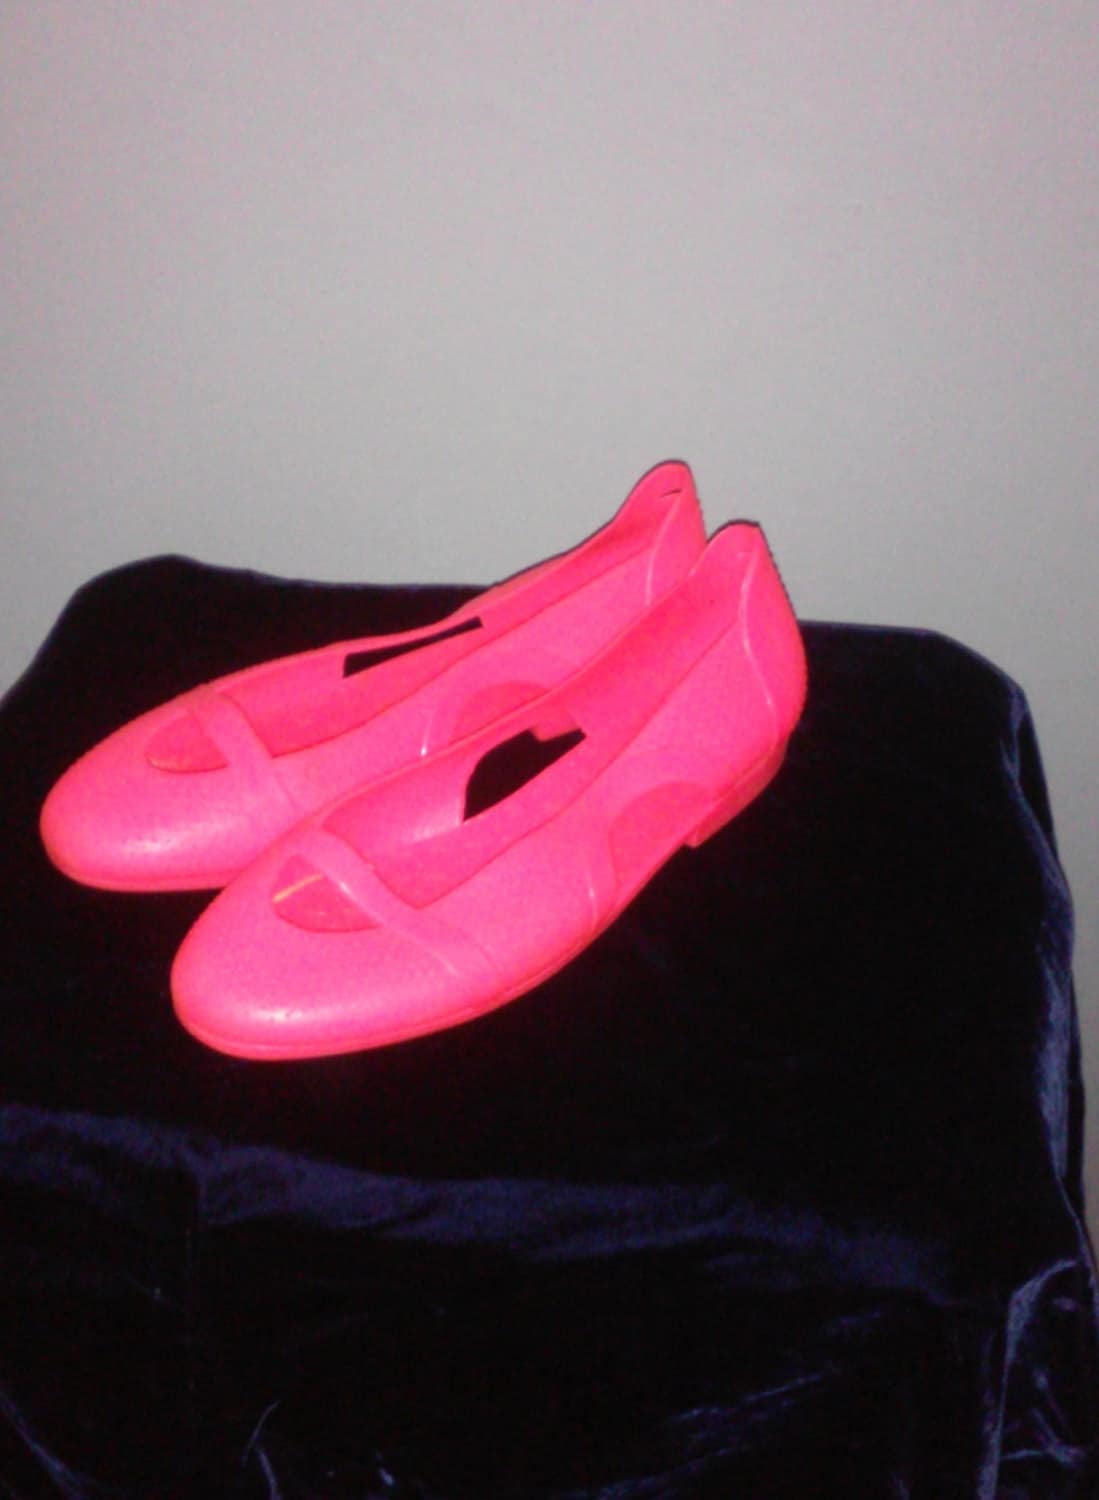 Vintages Pink Jelly Shoes / Rad 80's Jelly Shoes / Pink